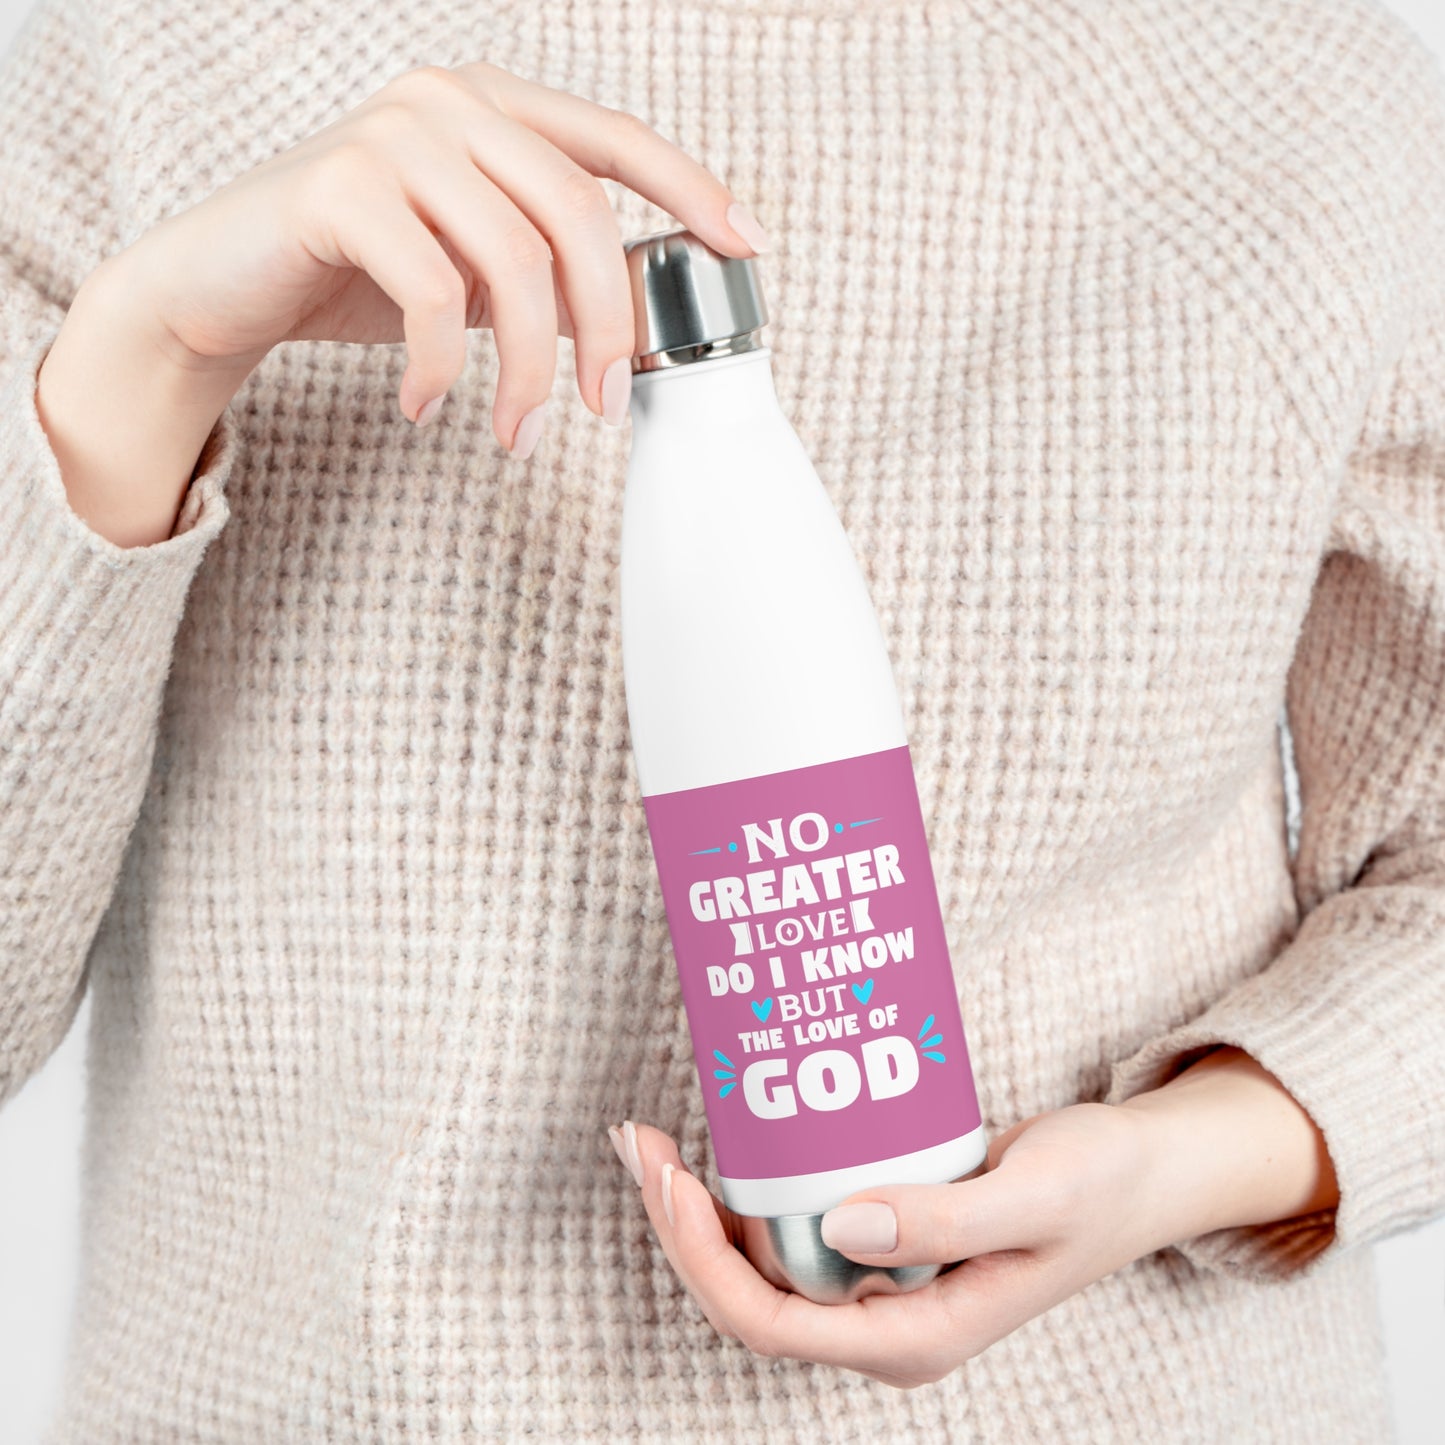 No Greater Love Do I Know But The Love Of God Insulated Bottle